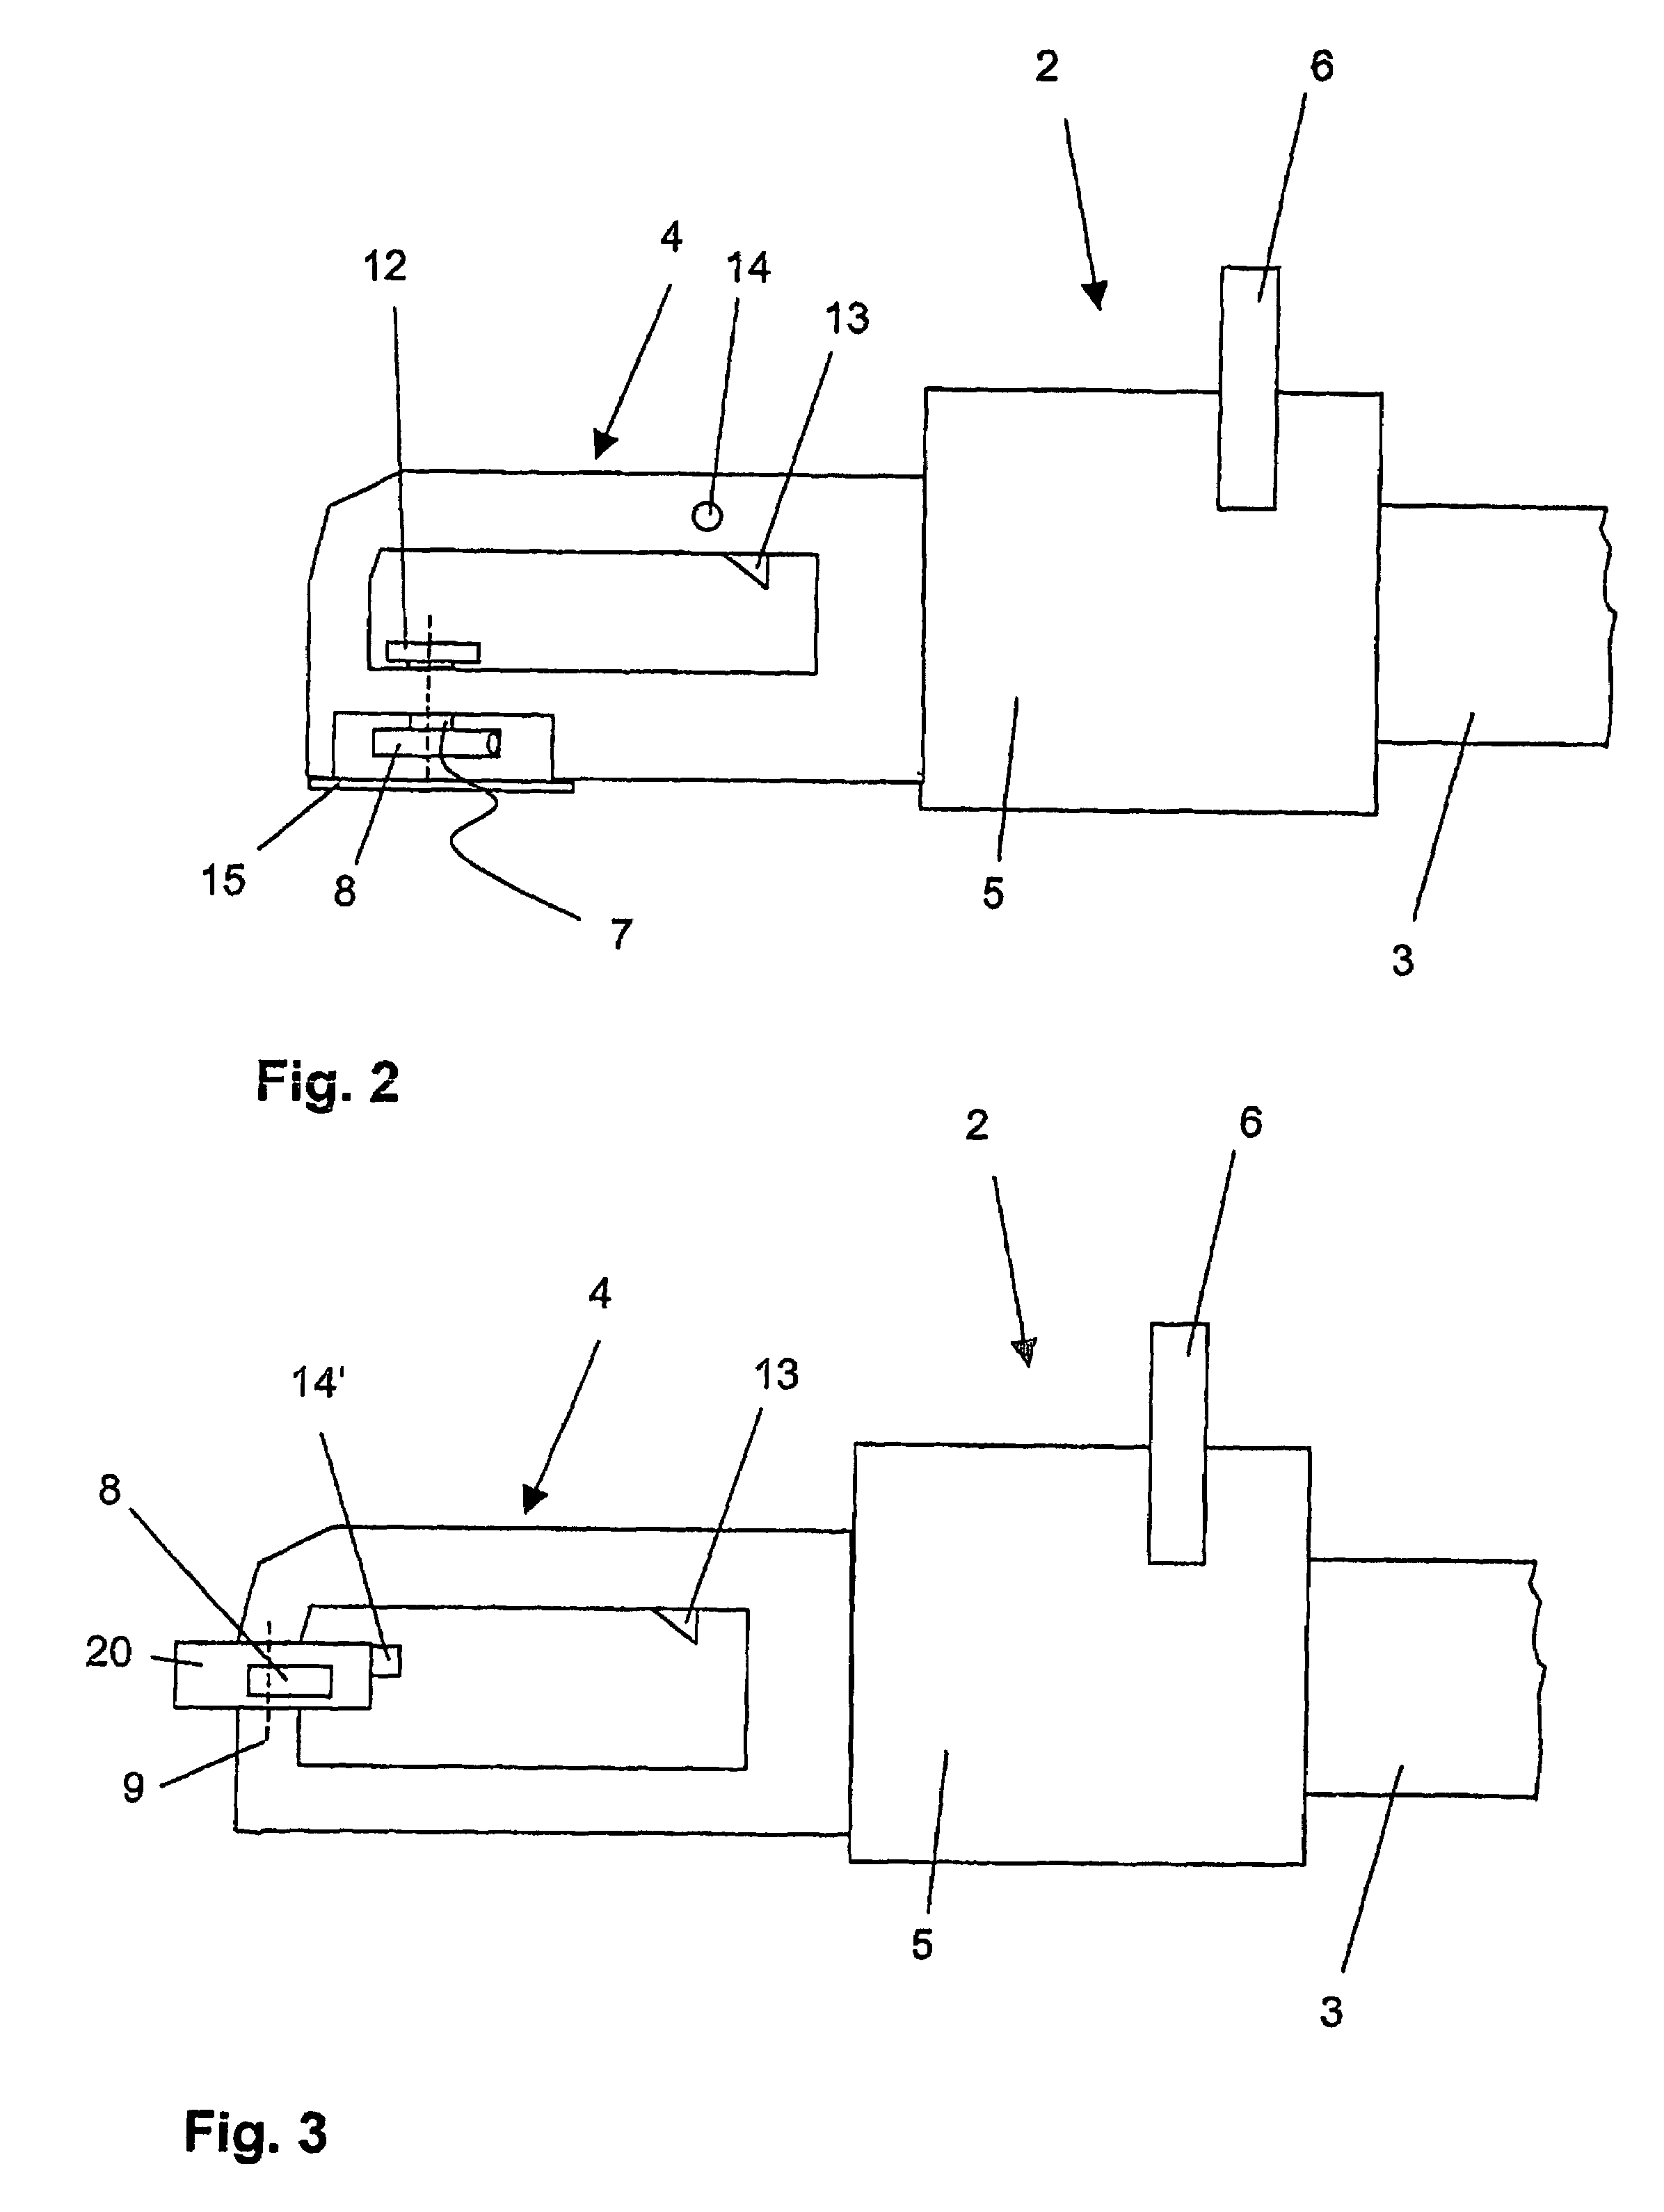 Power saw comprising a display device